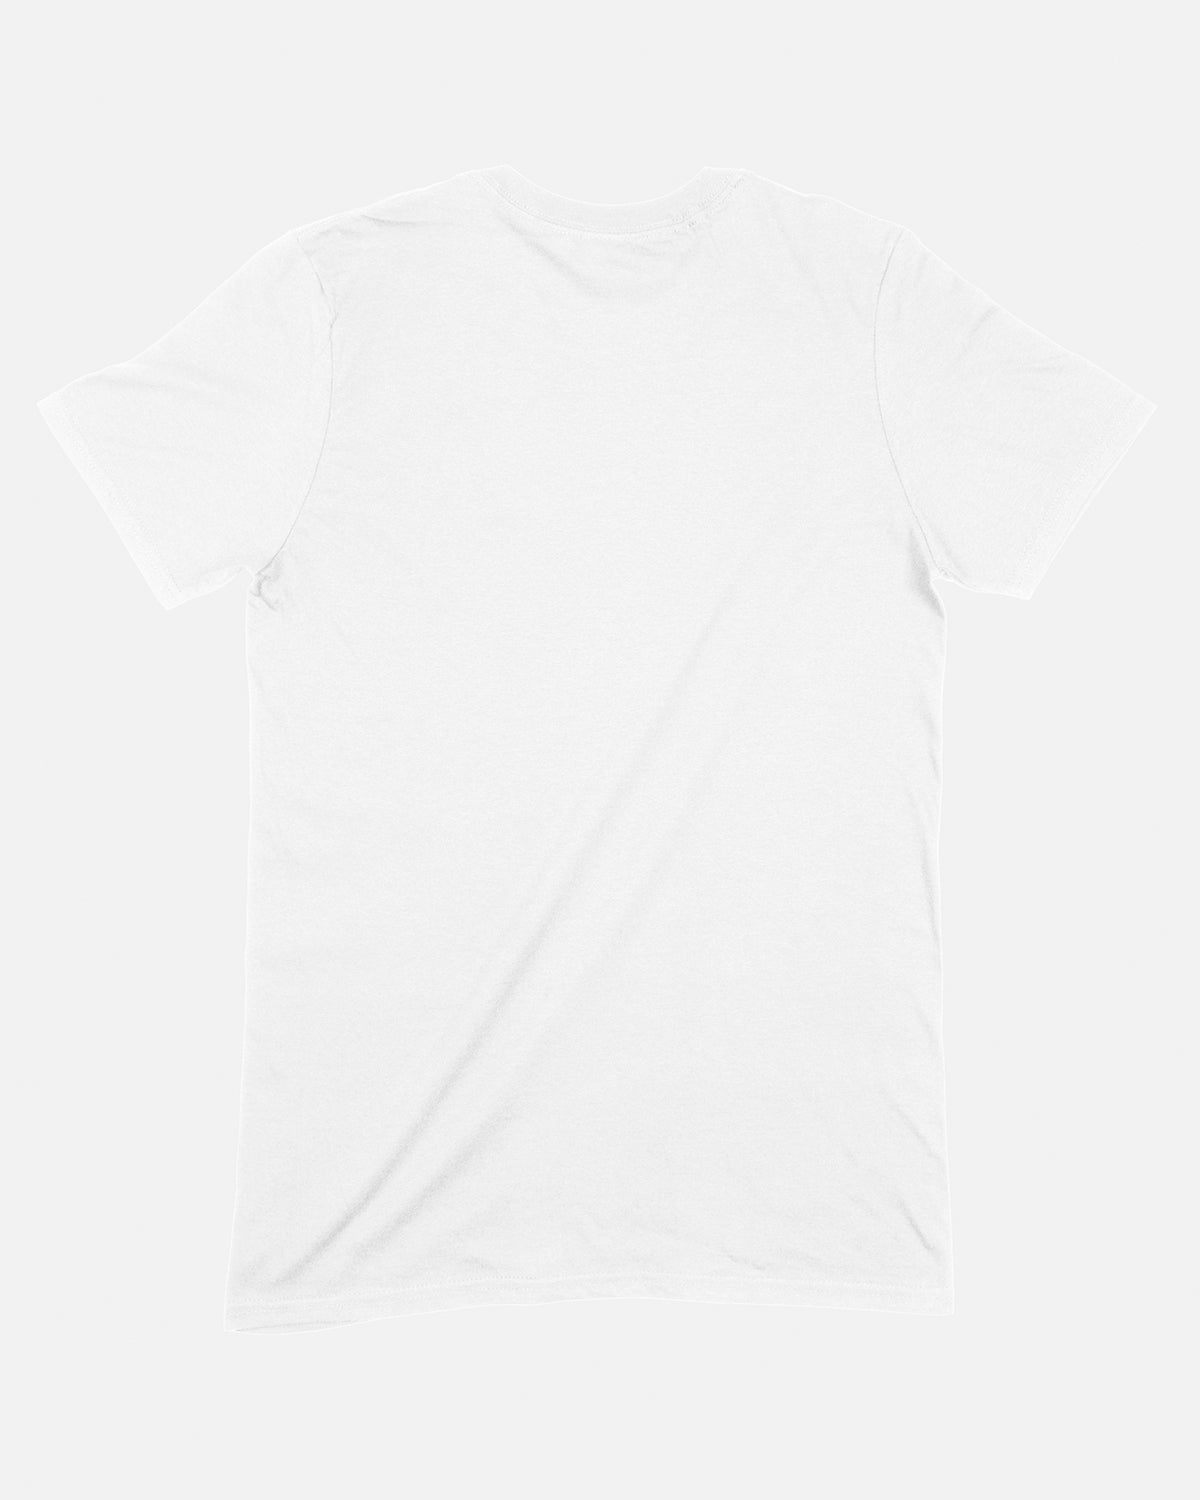 NFFC Classic White T-Shirt - Nottingham Forest FC